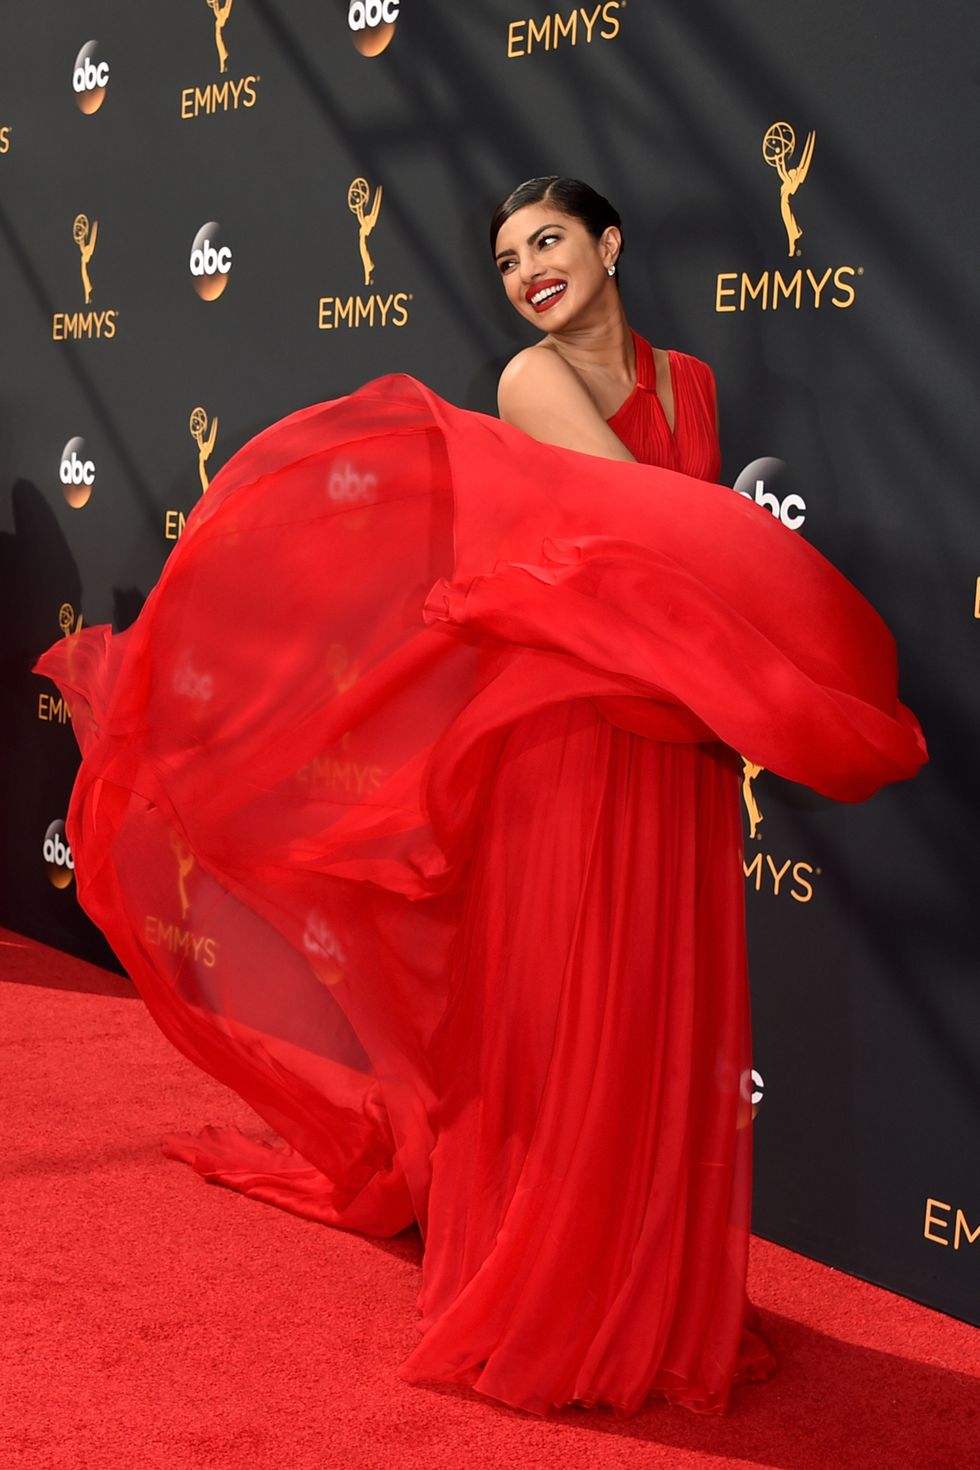 Human, Red, Flooring, Carpet, Fashion, Gown, Lipstick, Red carpet, Stage, Costume, 